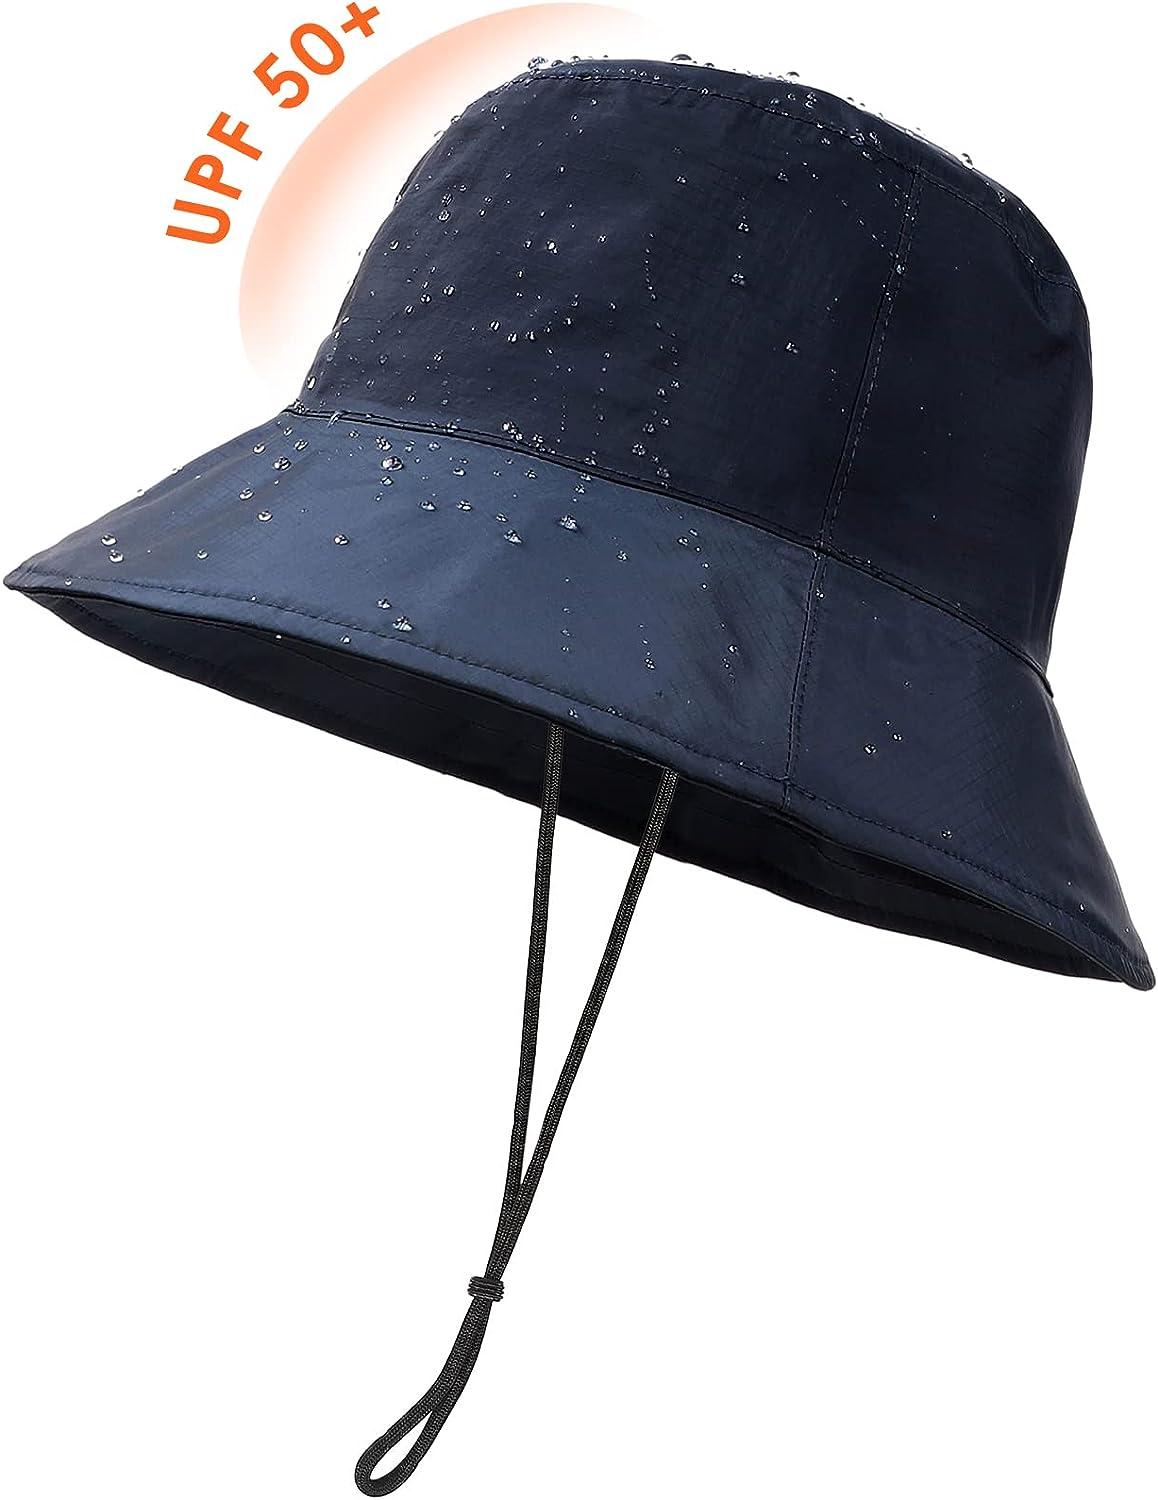 Outdoor Sun Hat Bucket Hats for Women Sun Protection Mesh Cap Quick-Dry UPF  50+ Coral Blue